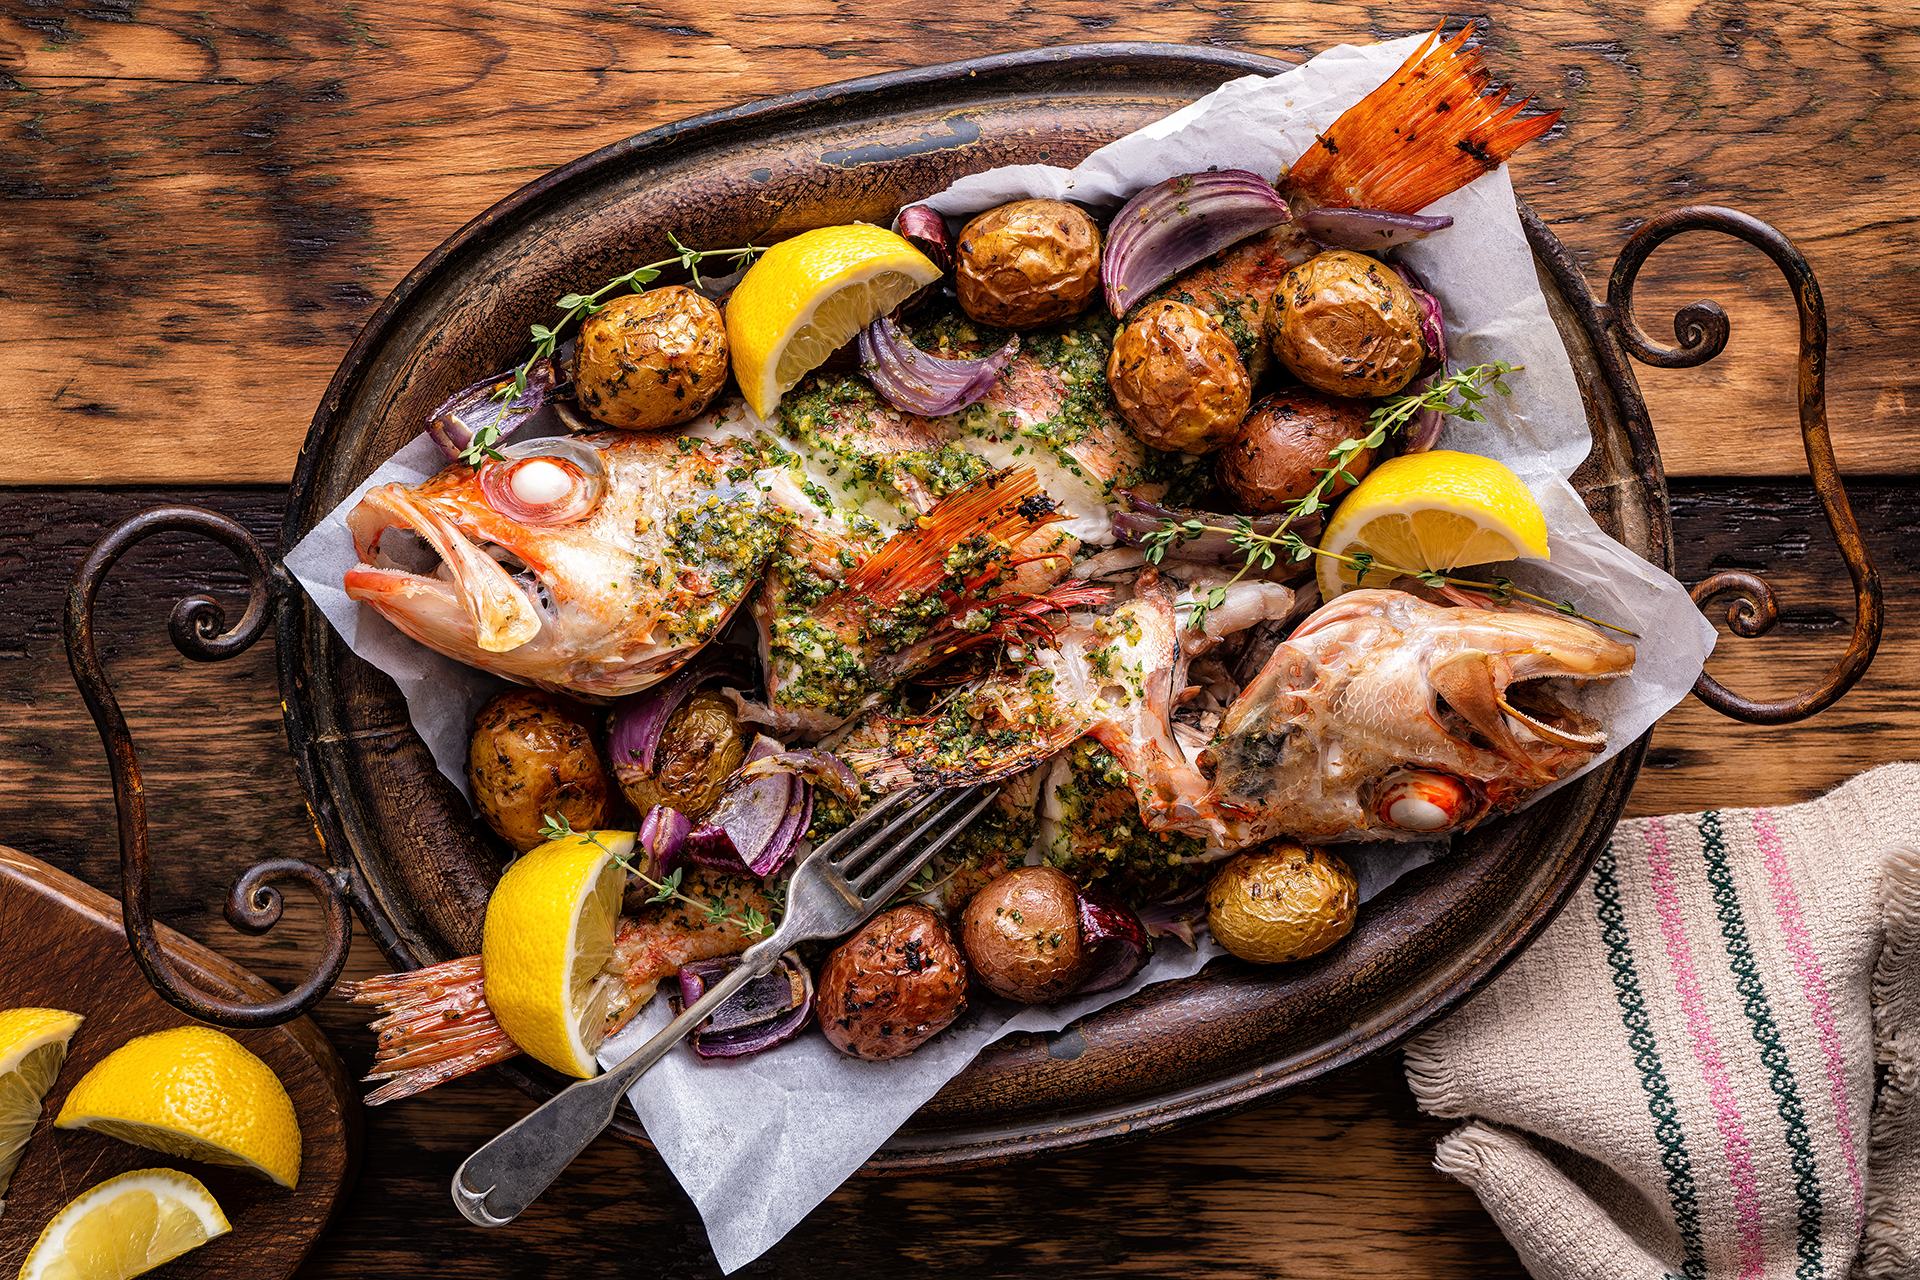 Whole Baked Ocean Perch with Chimichurri Sauce